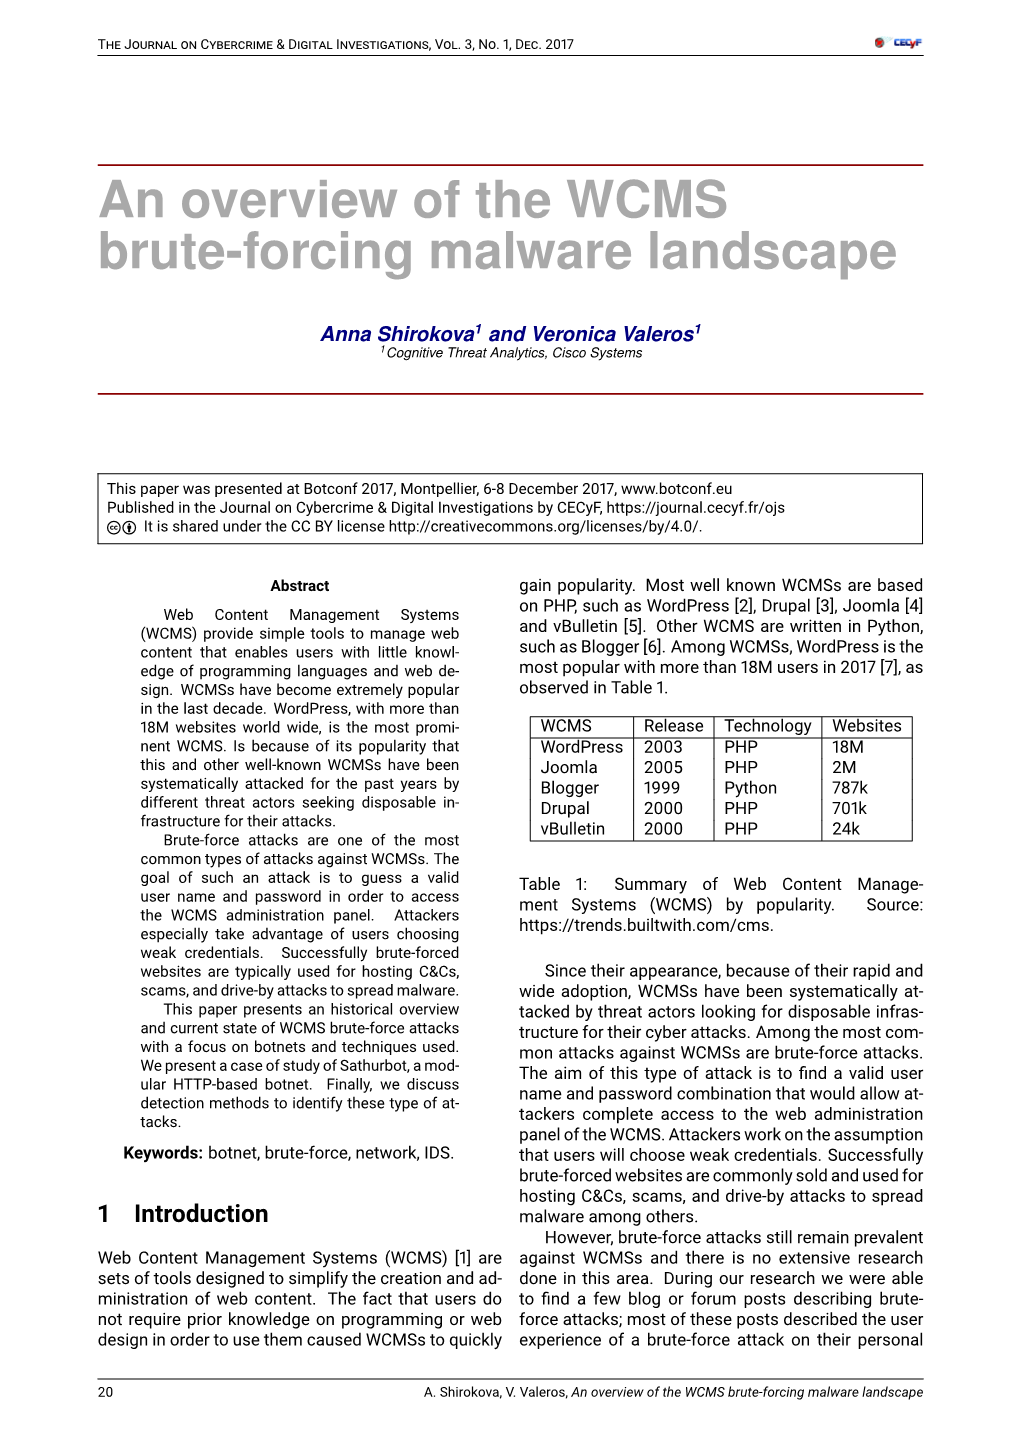 An Overview of the WCMS Brute-Forcing Malware Landscape